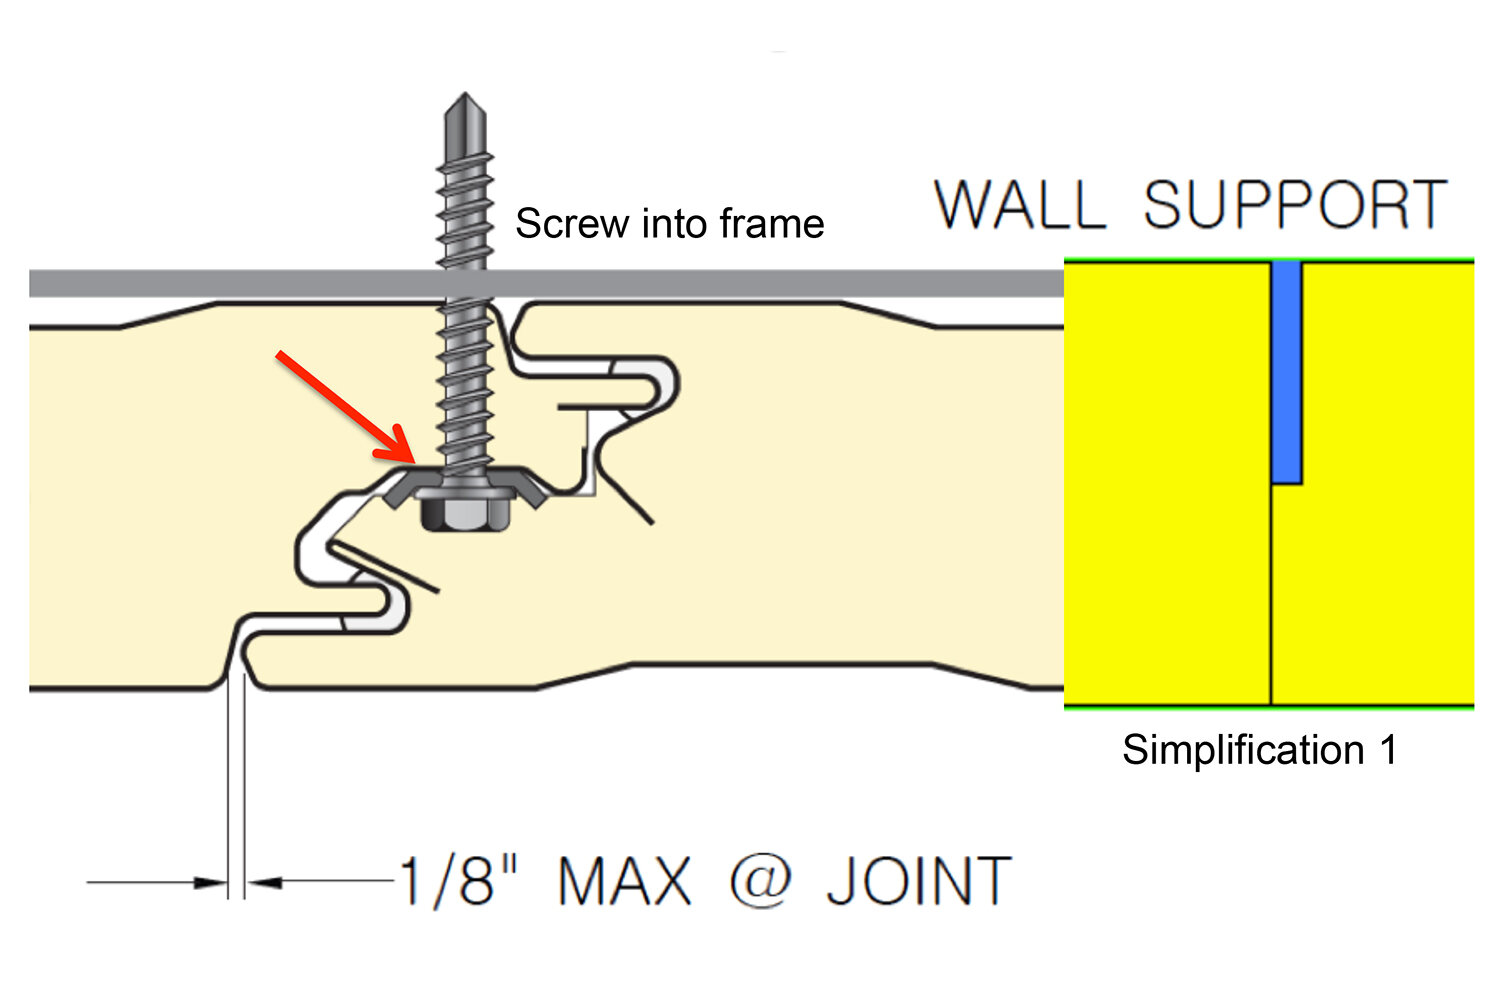 Screw heads are covered by insulation to prevent thermal bridging